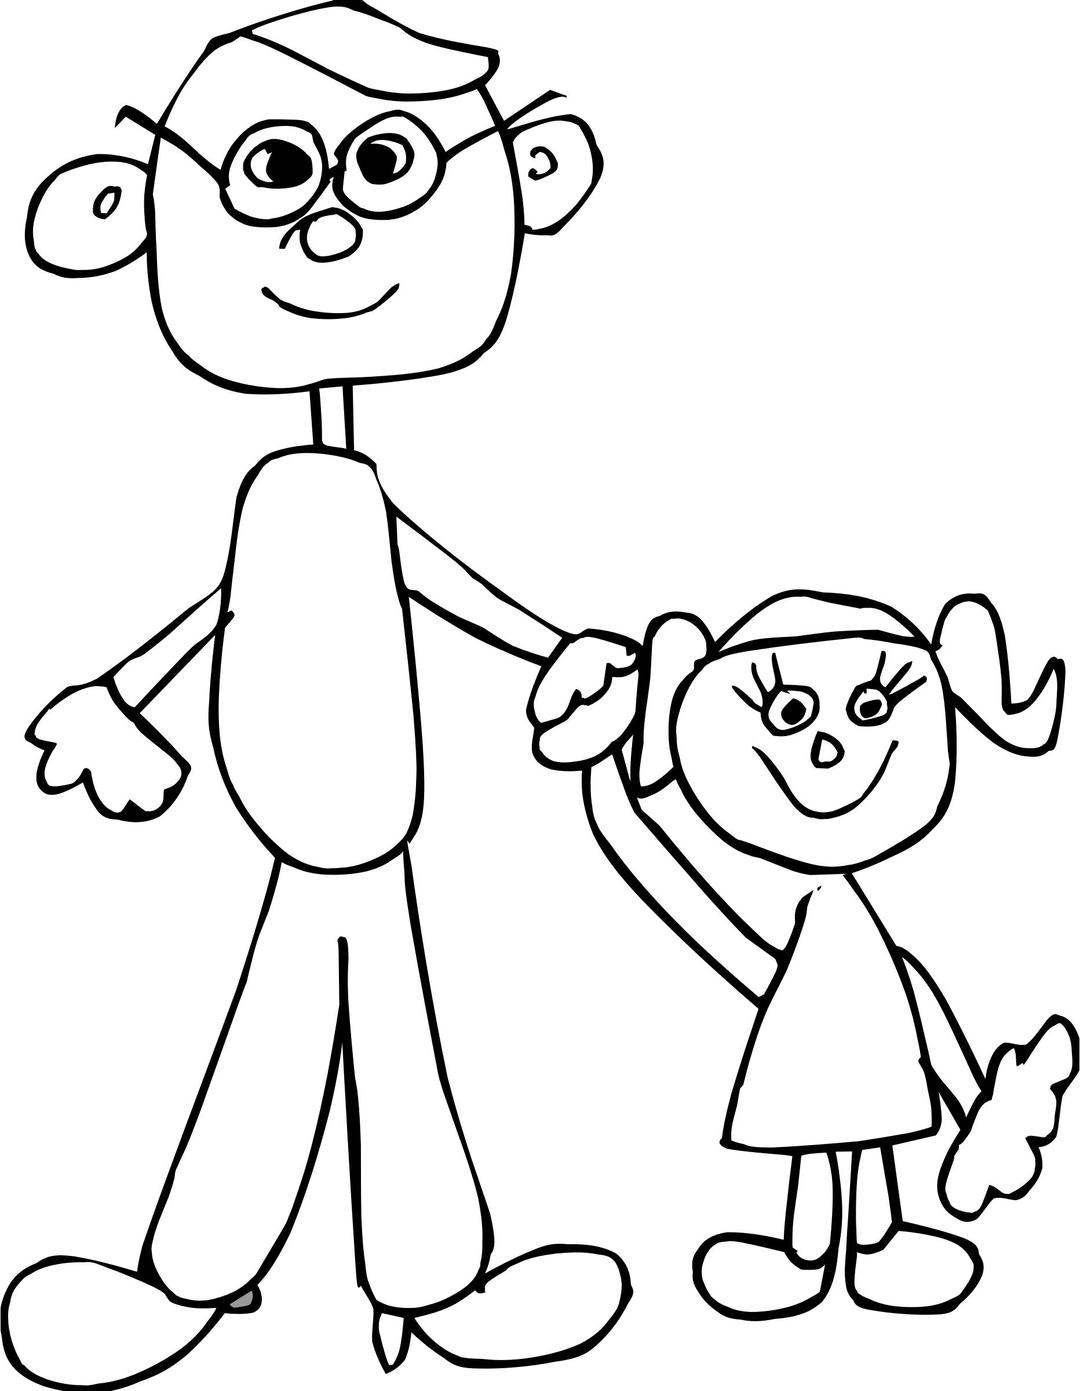 Dad holding daughters hand Animation png transparent